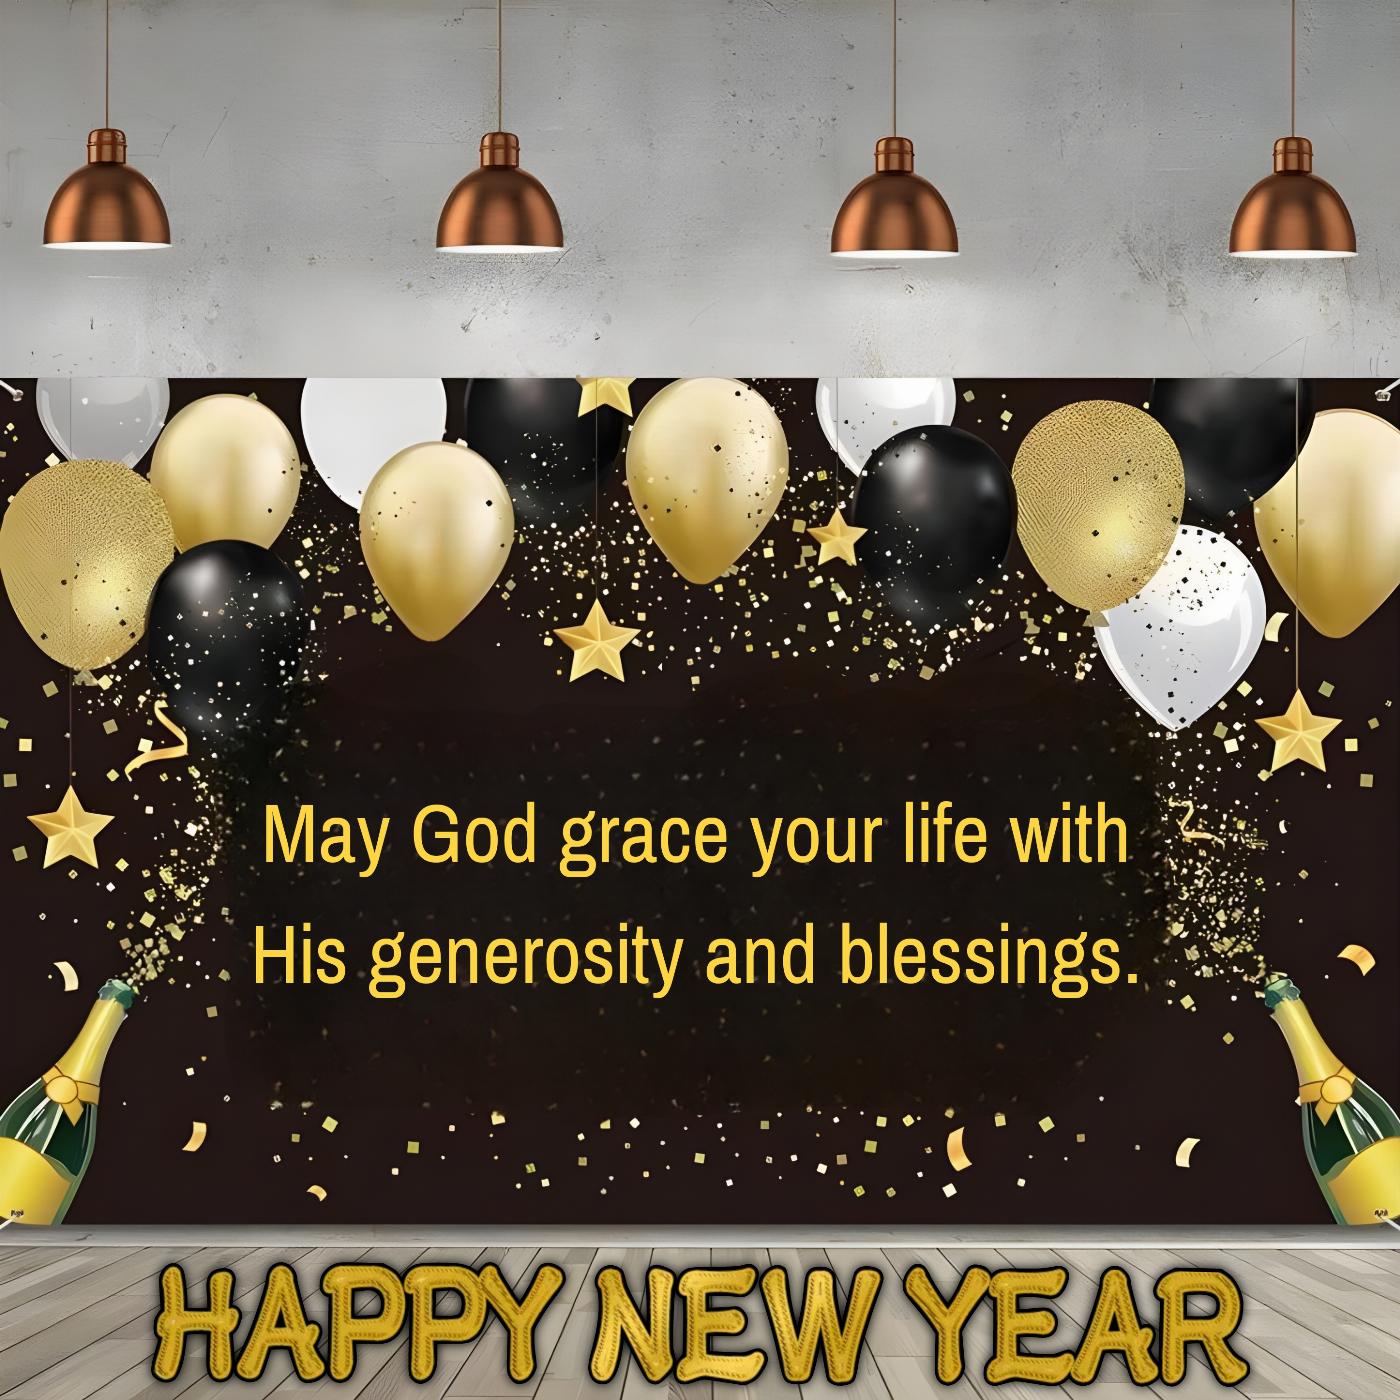 May God grace your life with His generosity and blessings